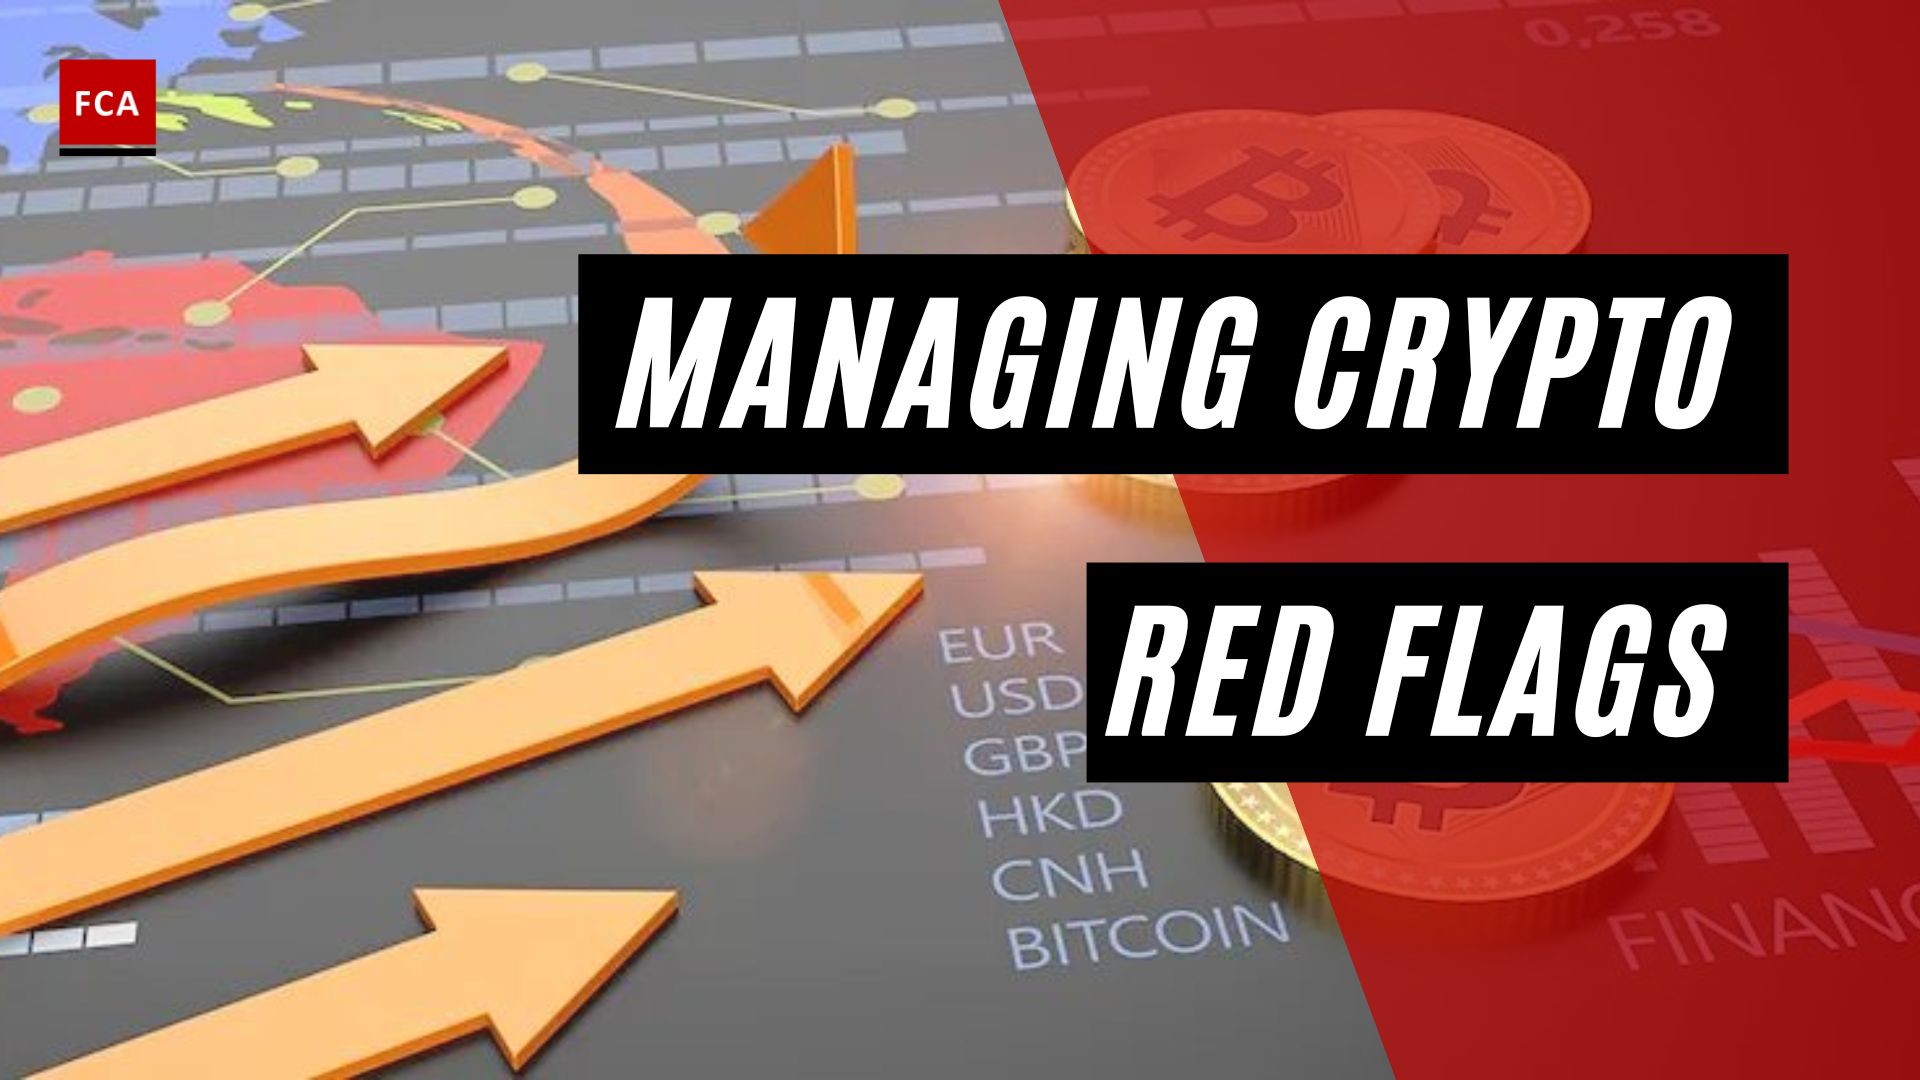 Managing Crypto Red Flags